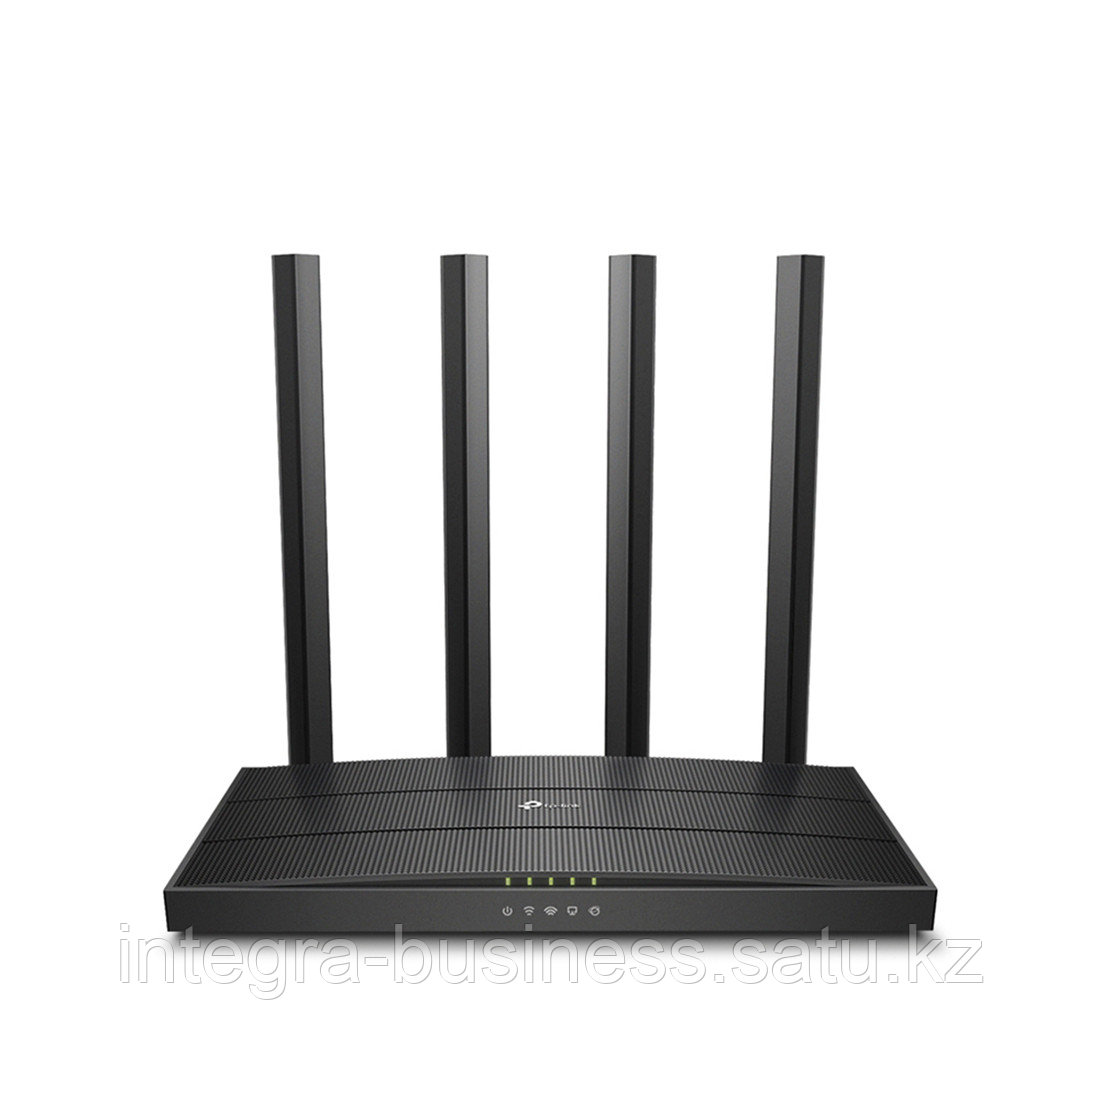 Маршрутизатор TP-Link Archer C6, фото 1